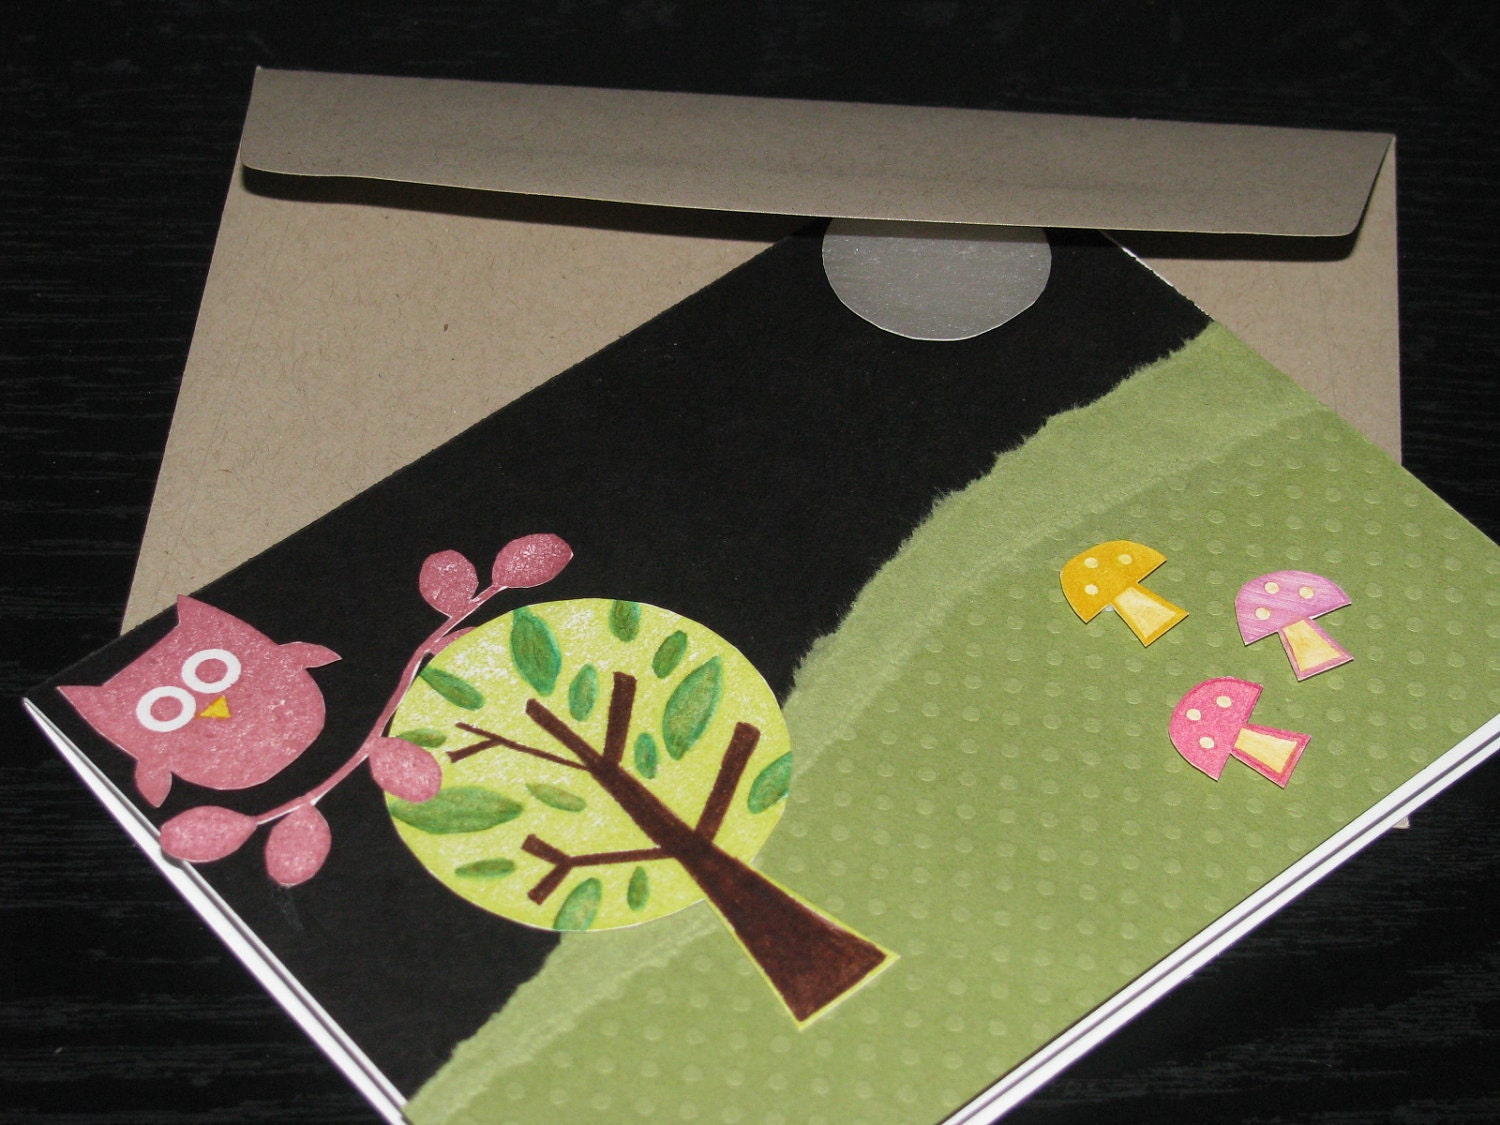 Blank Greeting Card - Forest Friends at Night with Owl and Mushrooms